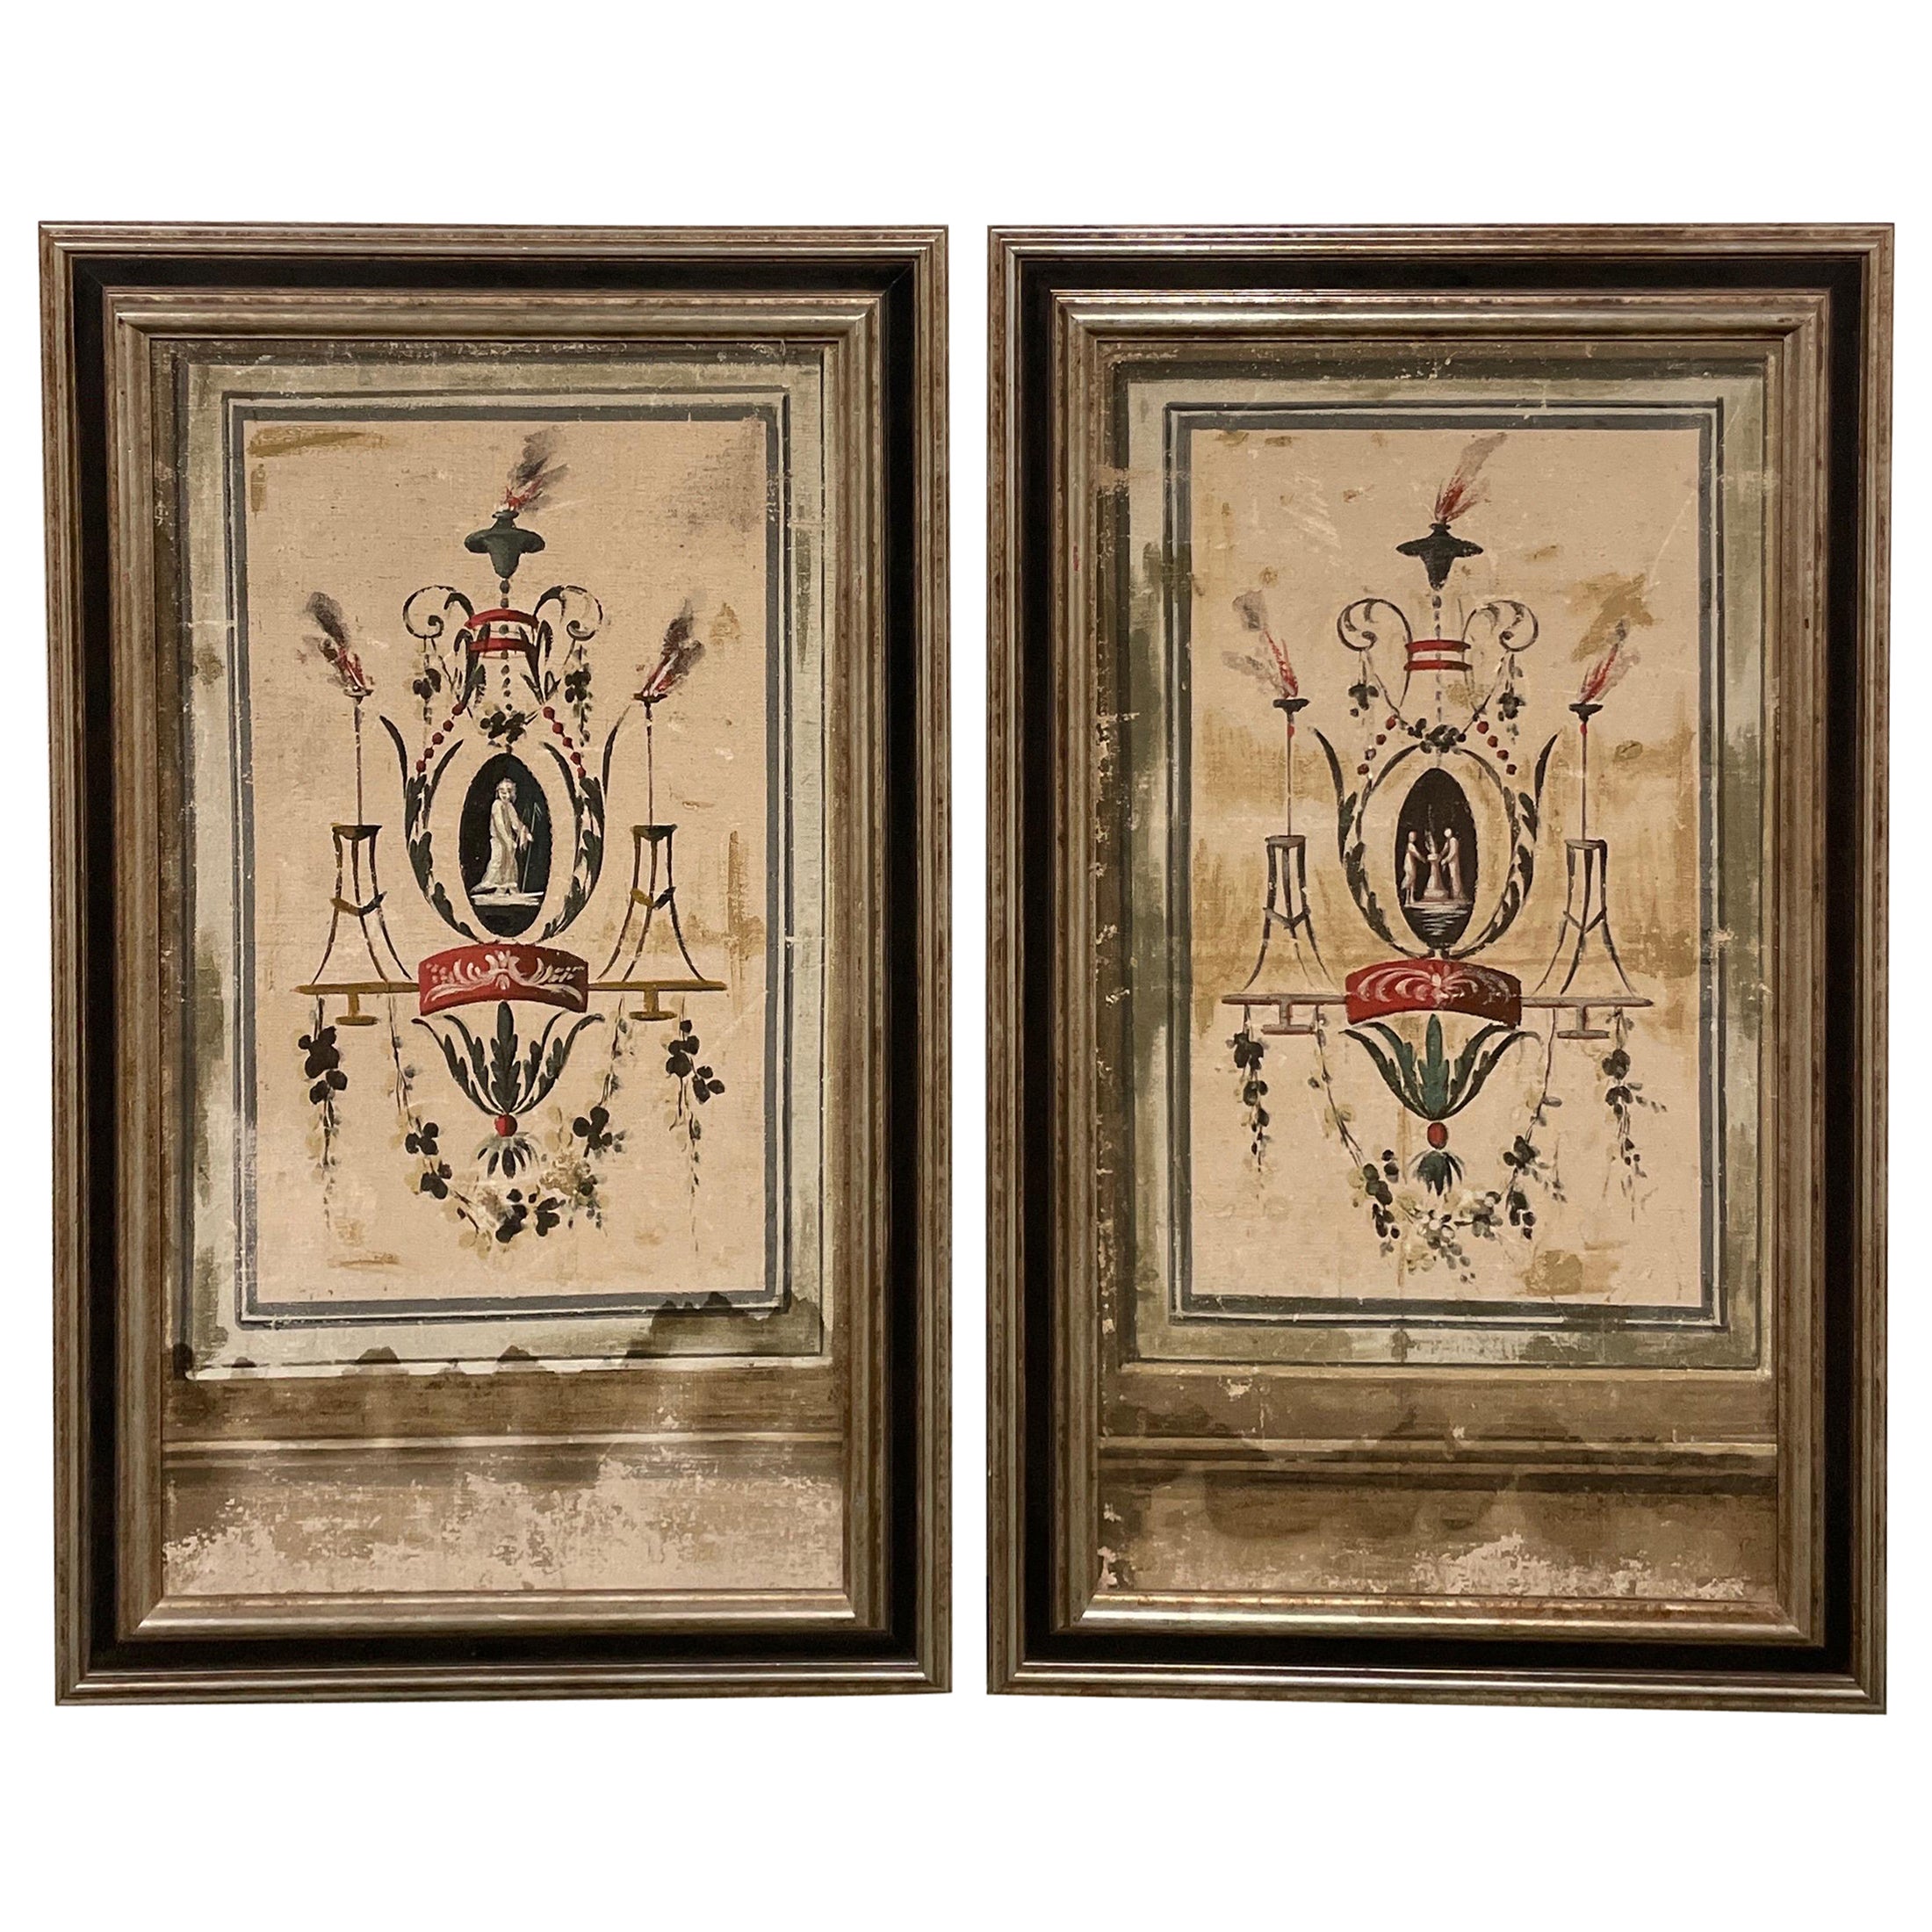 Pair of Frescoe Style Canvas Wall Panels